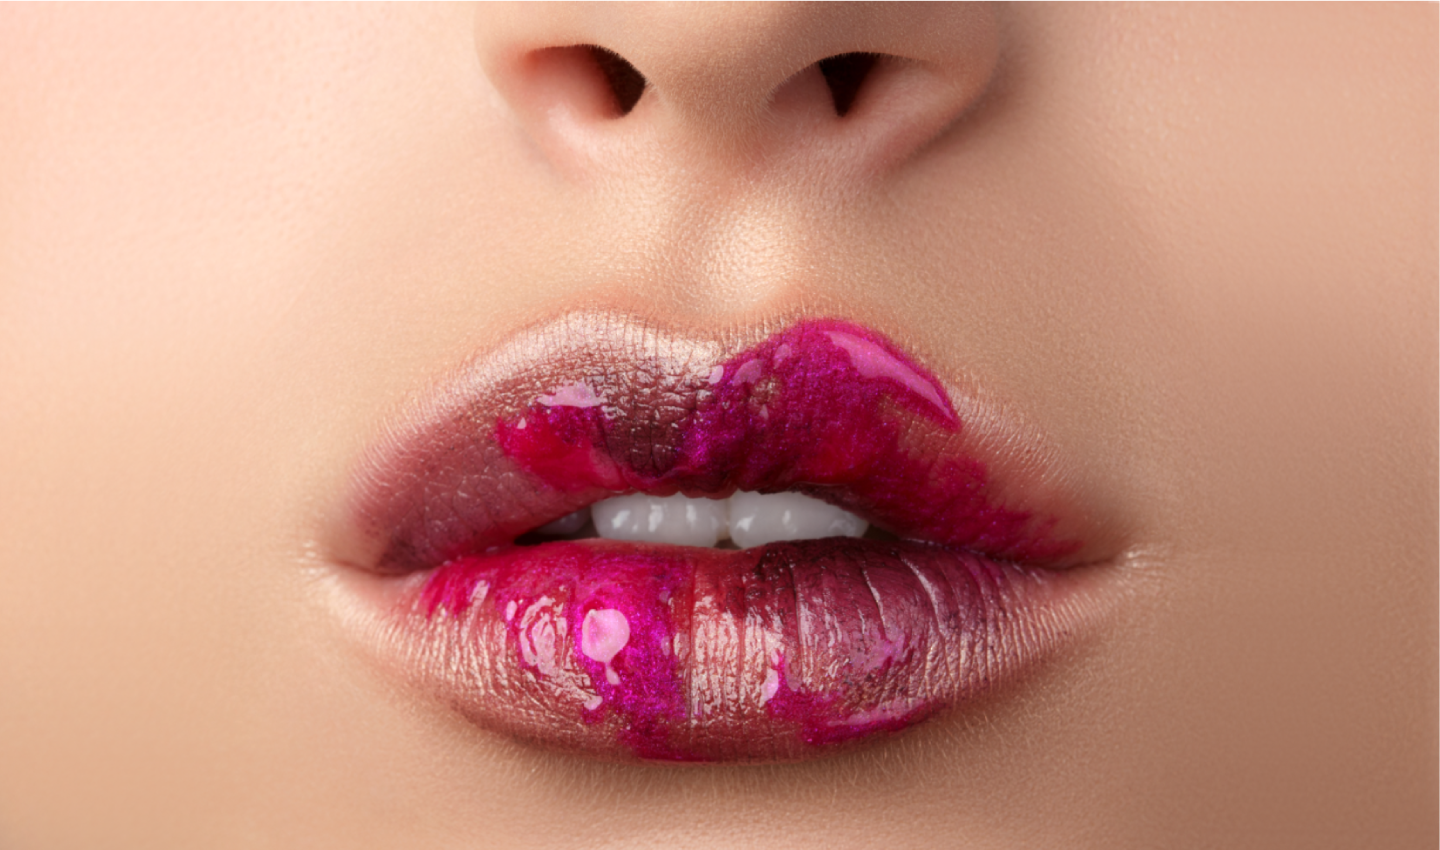 Beautiful lips adorned with mesmerising lip artistry, showcasing intricate designs and imaginative colour combinations